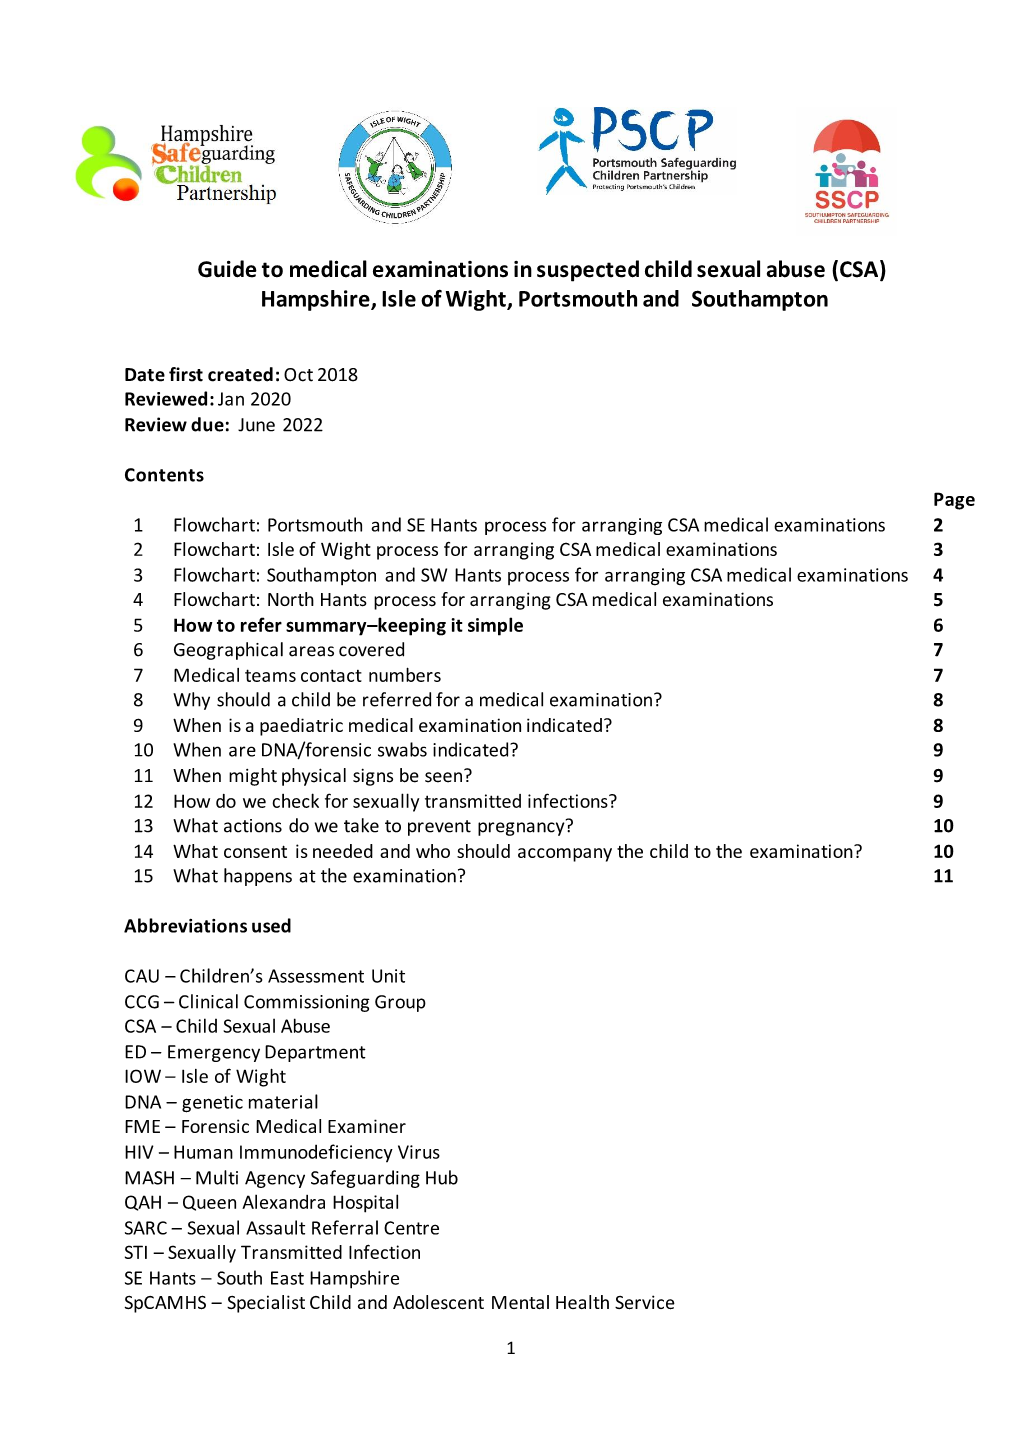 Guide to Medical Examinations in Suspected Child Sexual Abuse (CSA) Hampshire, Isle of Wight, Portsmouth and Southampton